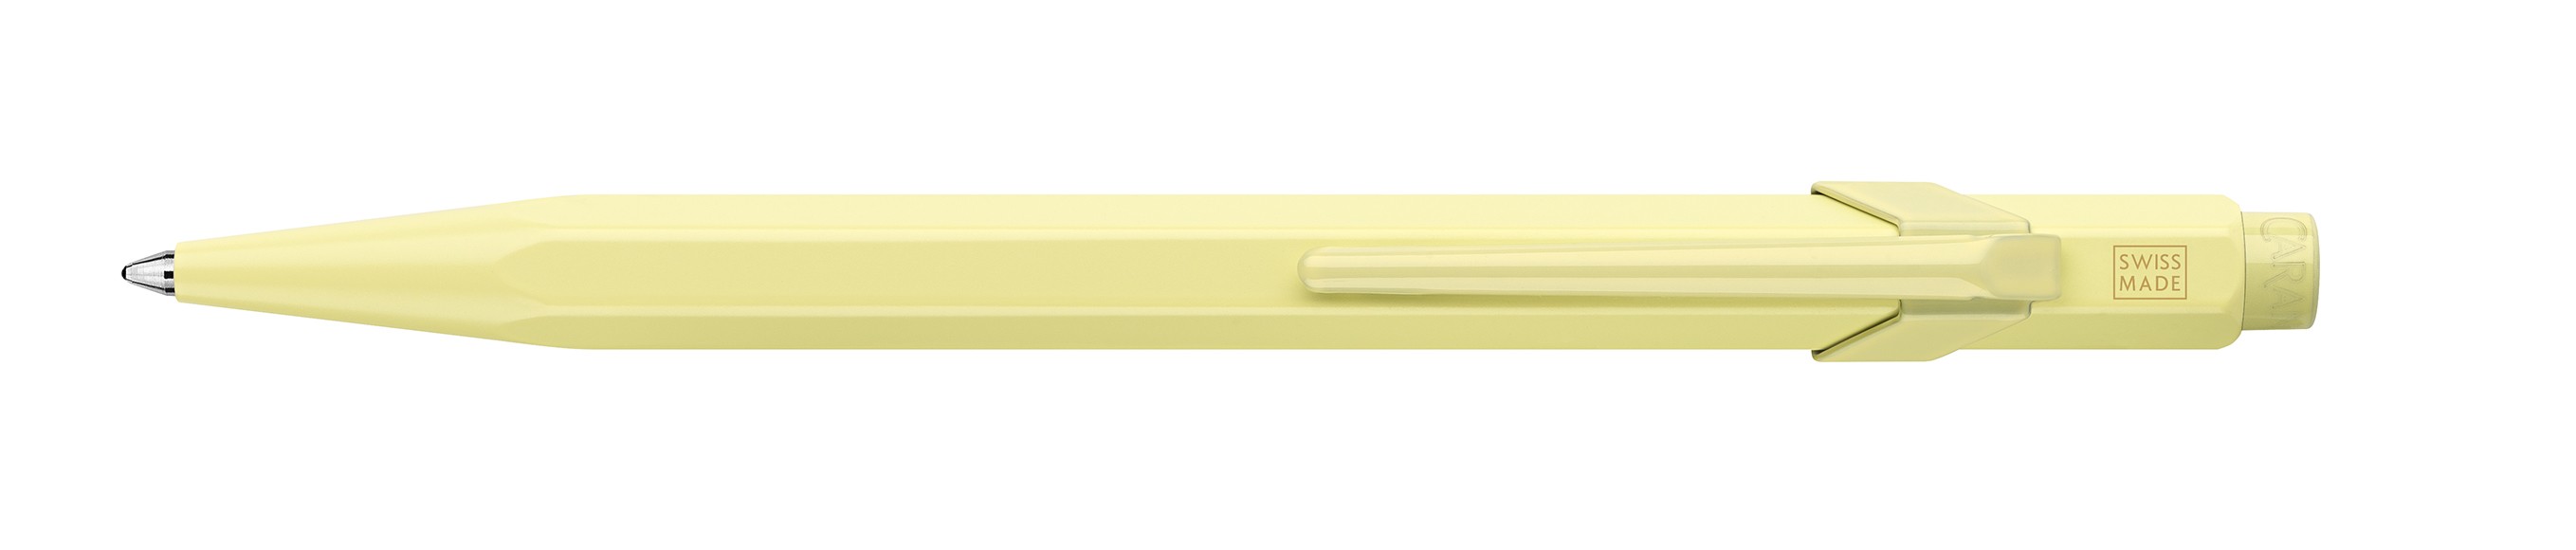 Caran d'Ache 849 Claim Your Style 4 Limited Edition Icy Lemon Ballpoint